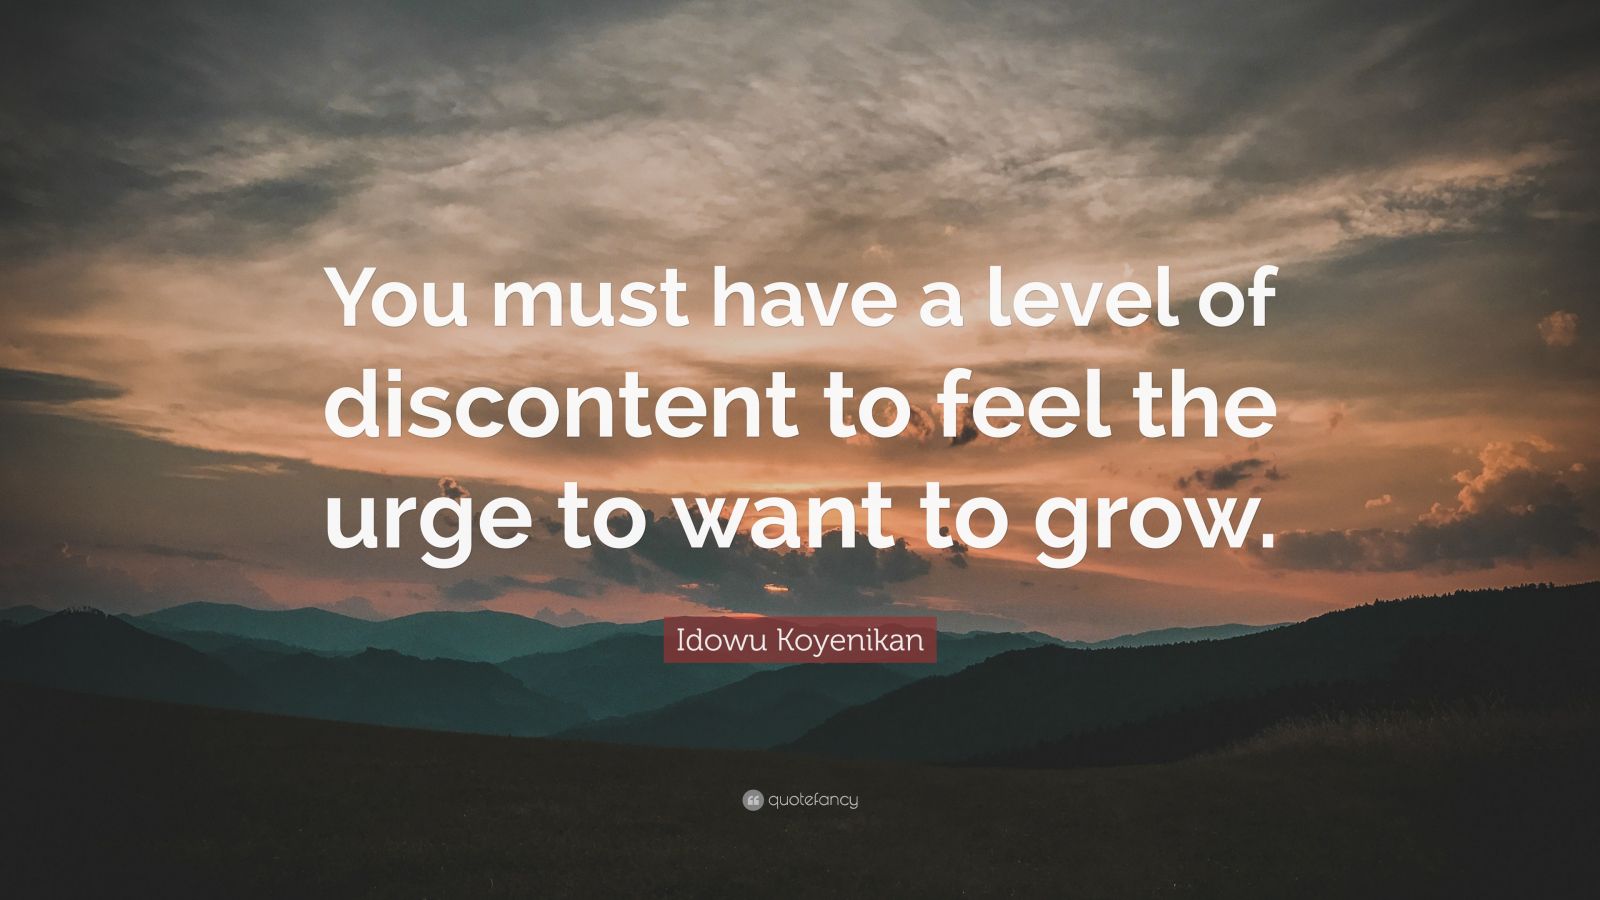 Idowu Koyenikan Quote “you Must Have A Level Of Discontent To Feel The Urge To Want To Grow ”